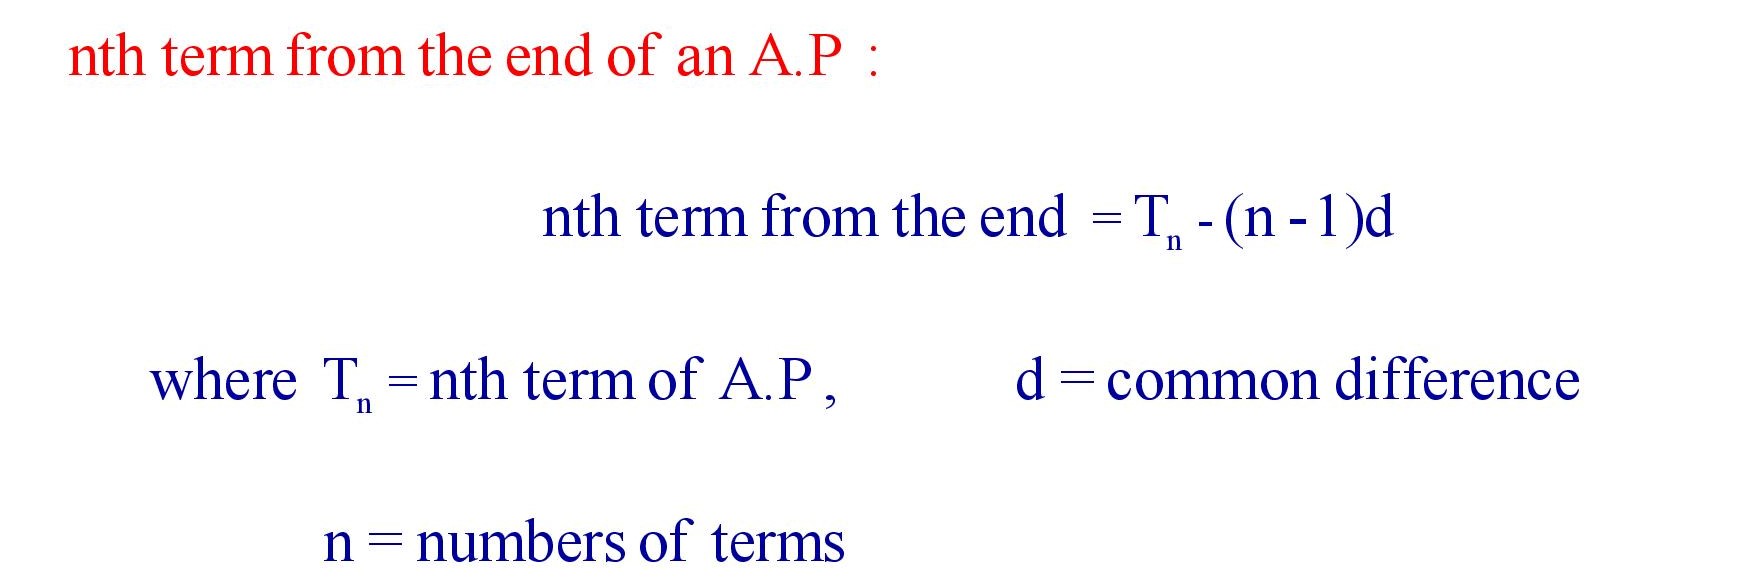 nth term from the end of an A.P Formula